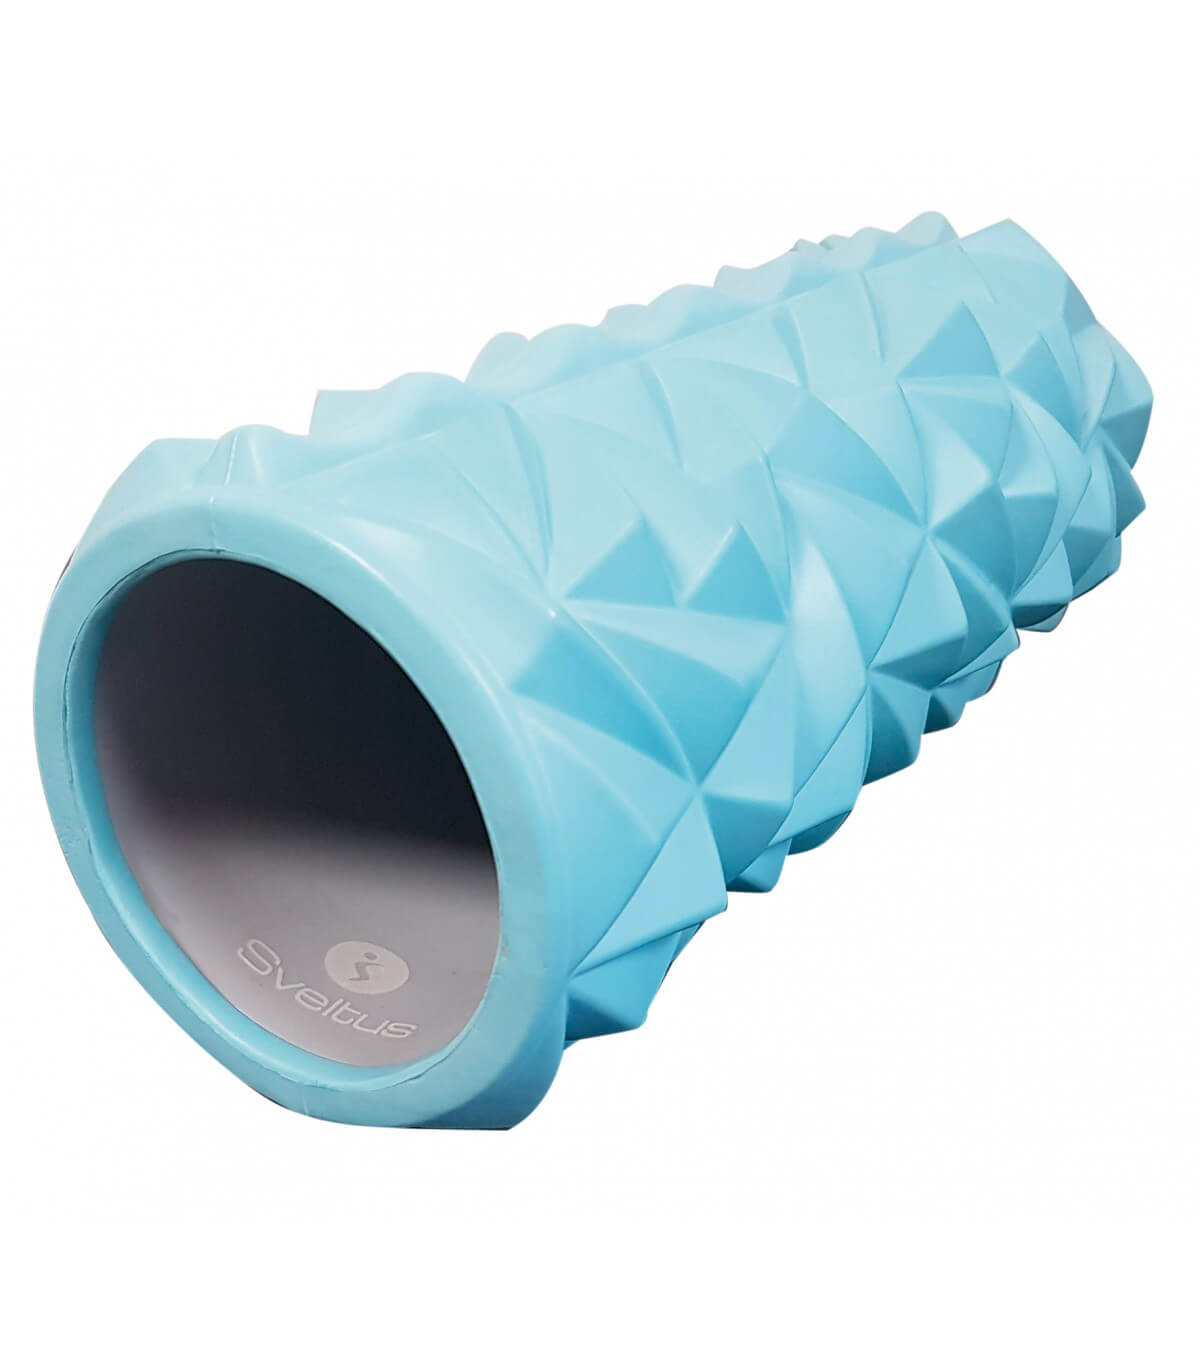 Foam Rollers Aid Your Recovery | Physiosupplies